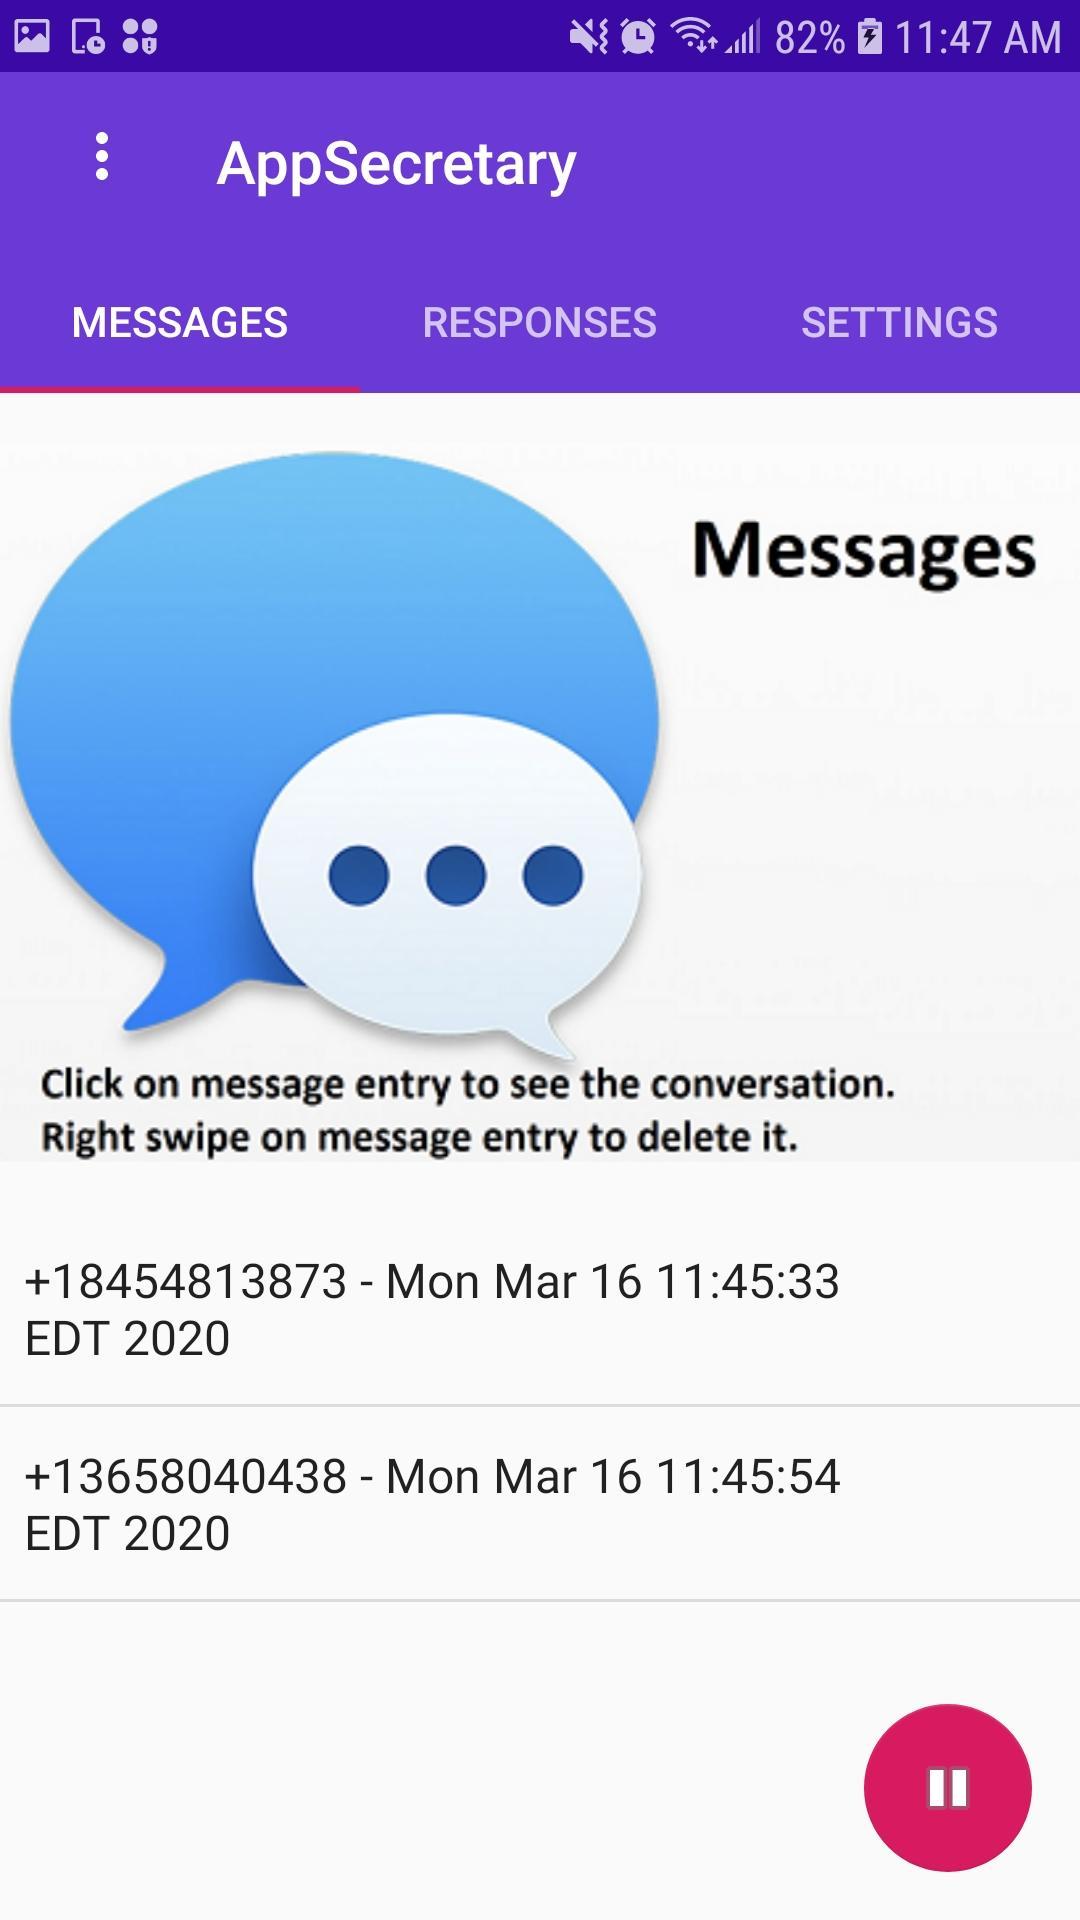 AppSecretary Auto Reply SMS Text Messages 1.16 Screenshot 1